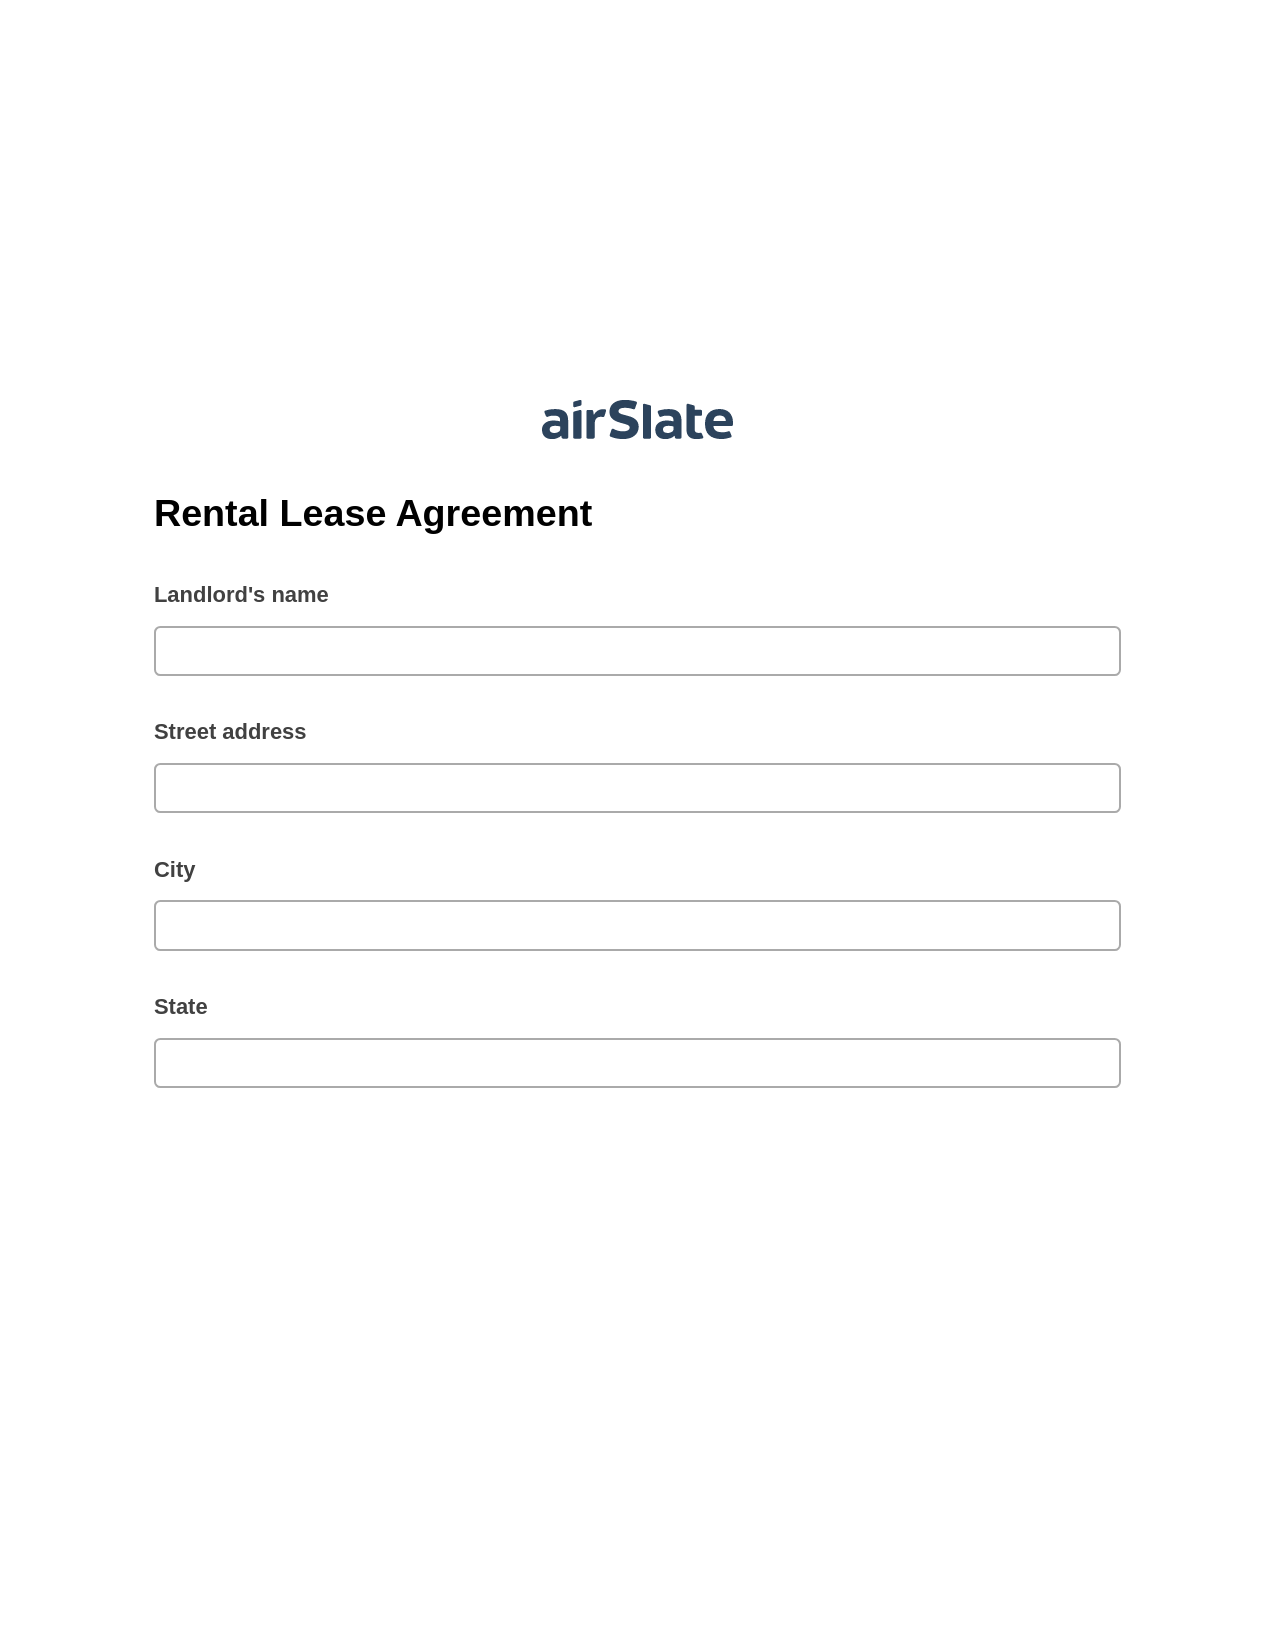 Multirole Rental Lease Agreement Pre-fill from Excel Spreadsheet Dropdown Options Bot, Create Slate from another Flow Bot, Export to MySQL Bot